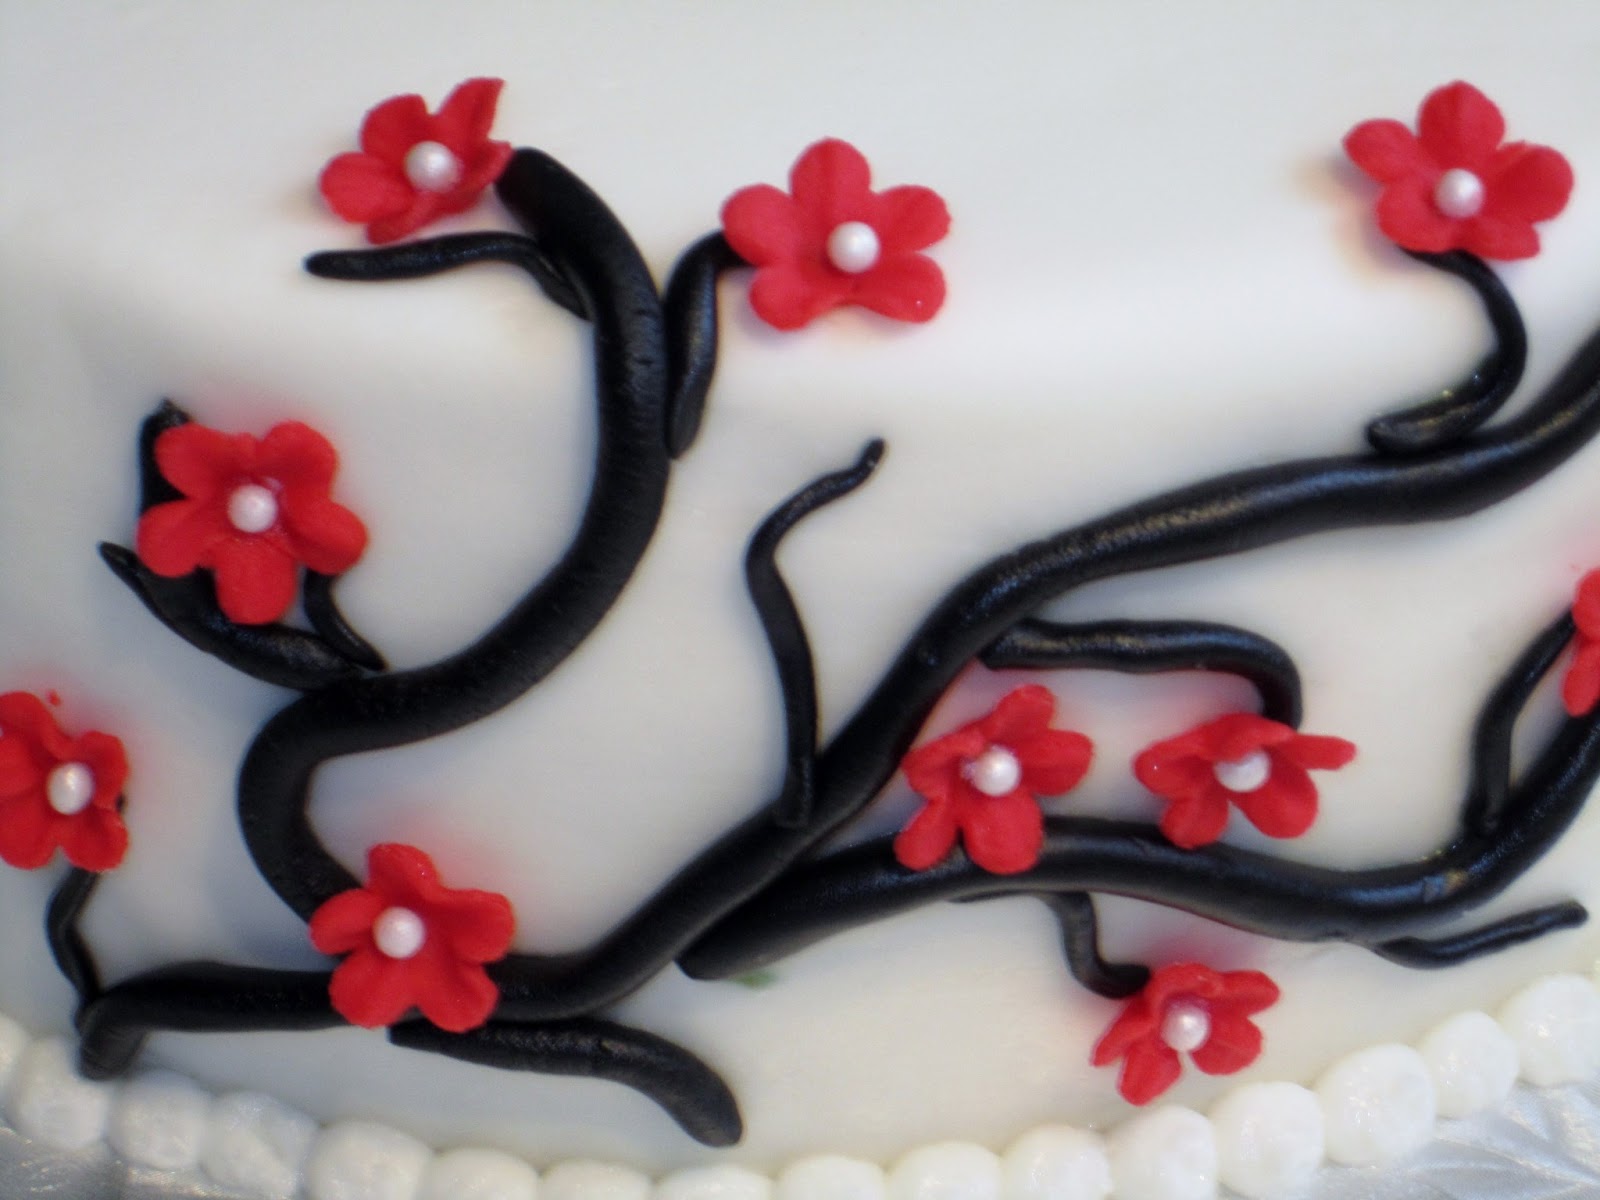 CakesOr Something Like That: 60th Birthday Cake - Red and Black Fondant  Decorations